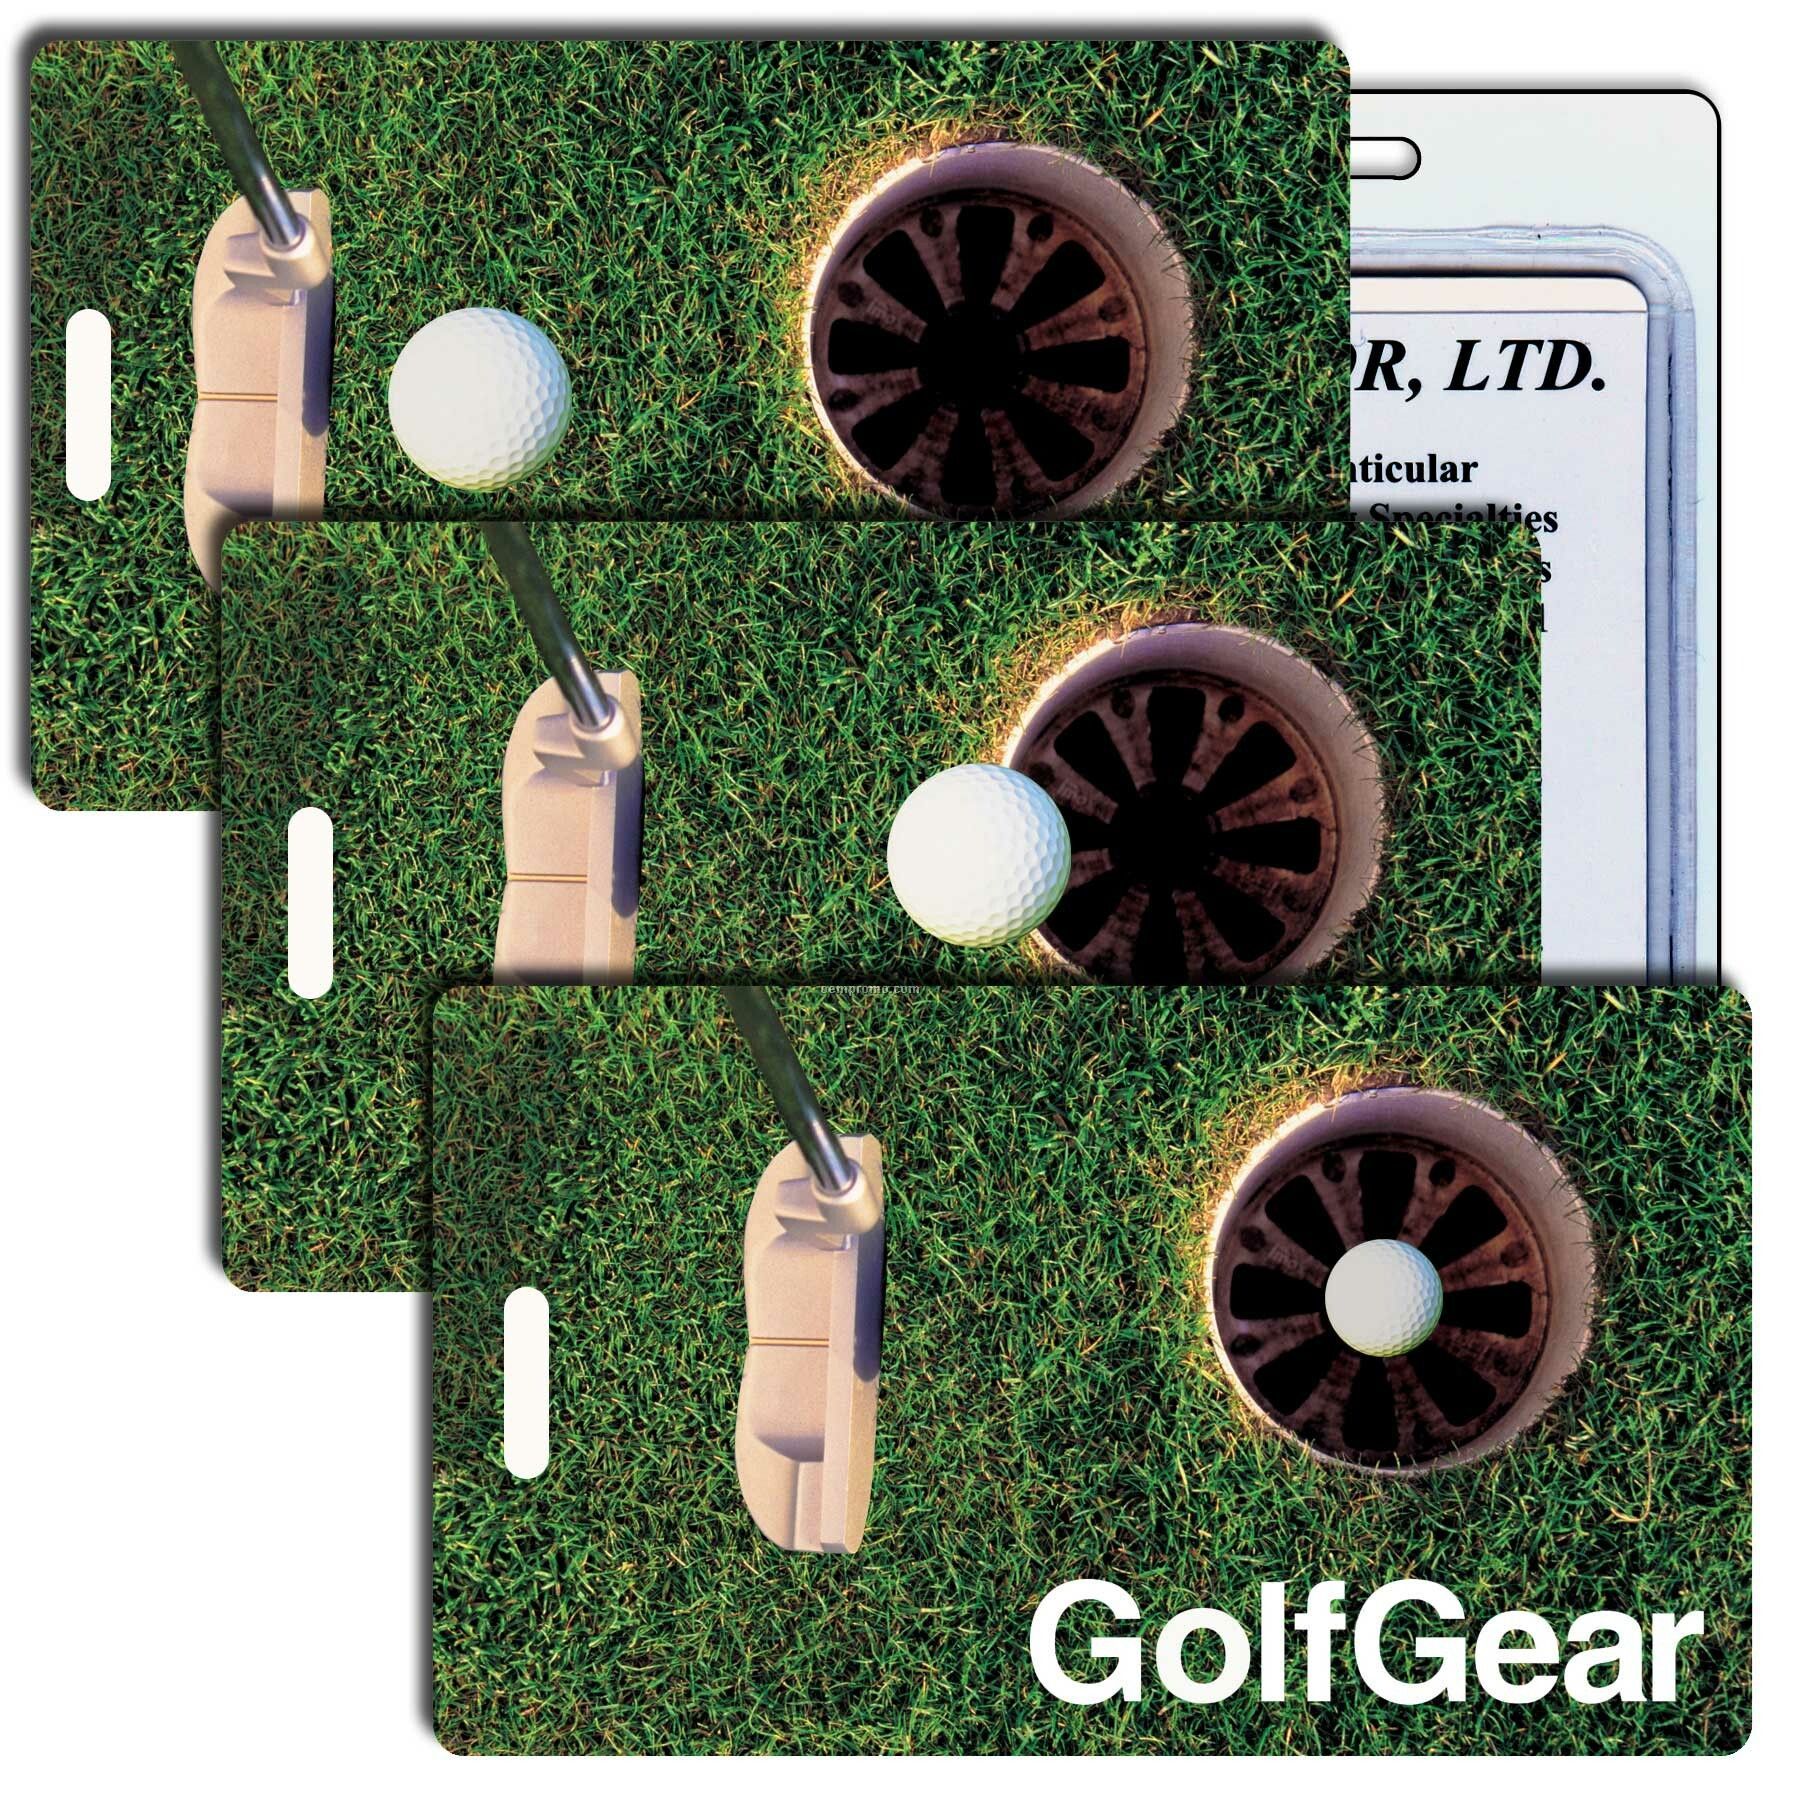 Luggage Tag 3d Lenticular Golf Gear Stock Image (Imprint Product)